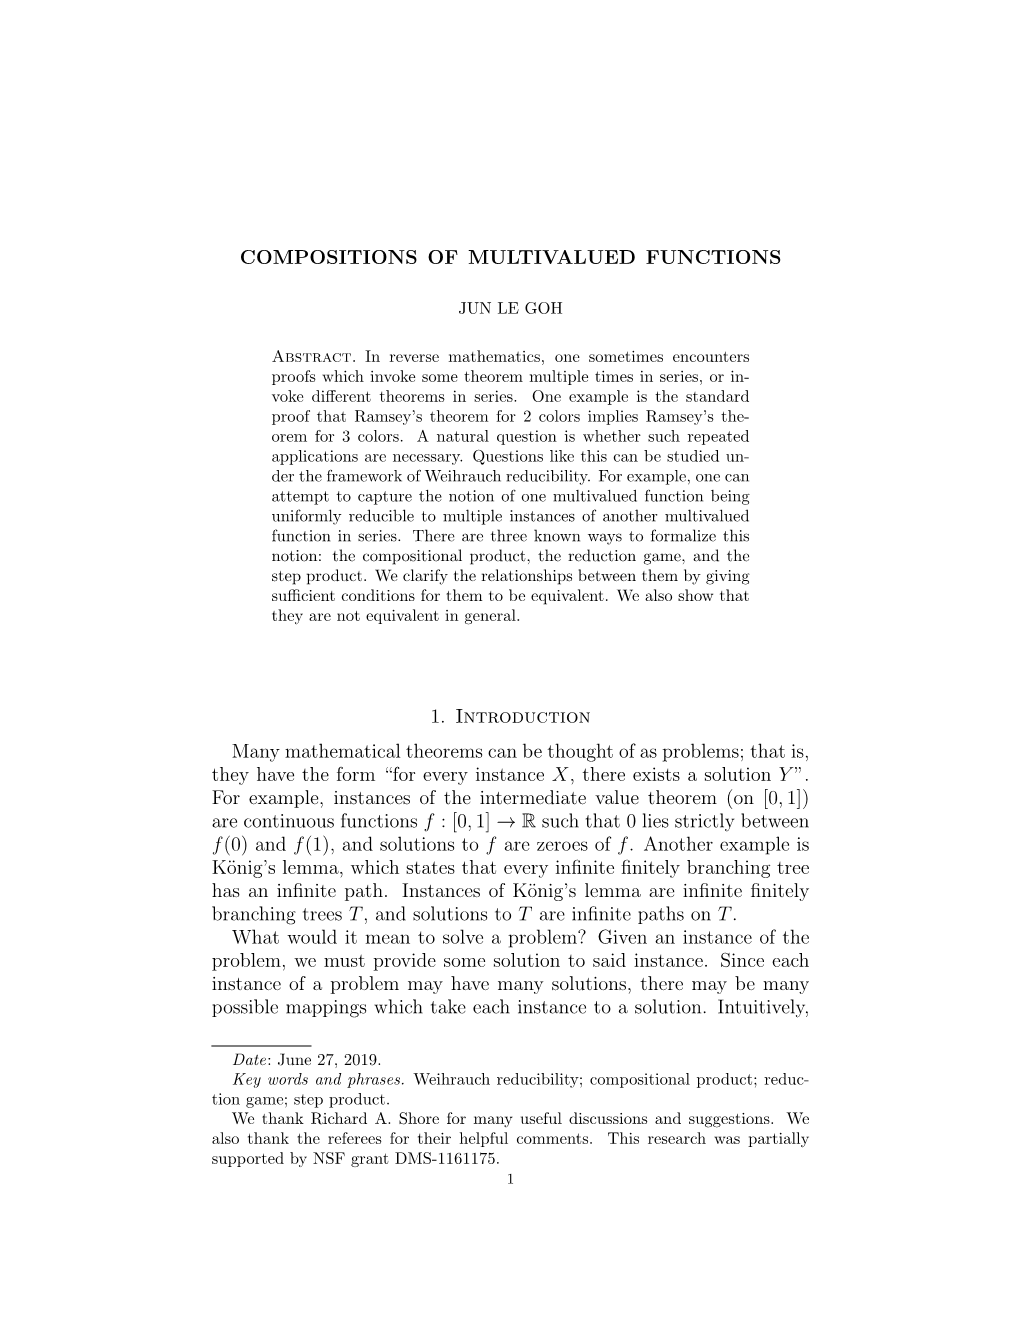 Compositions of Multivalued Functions